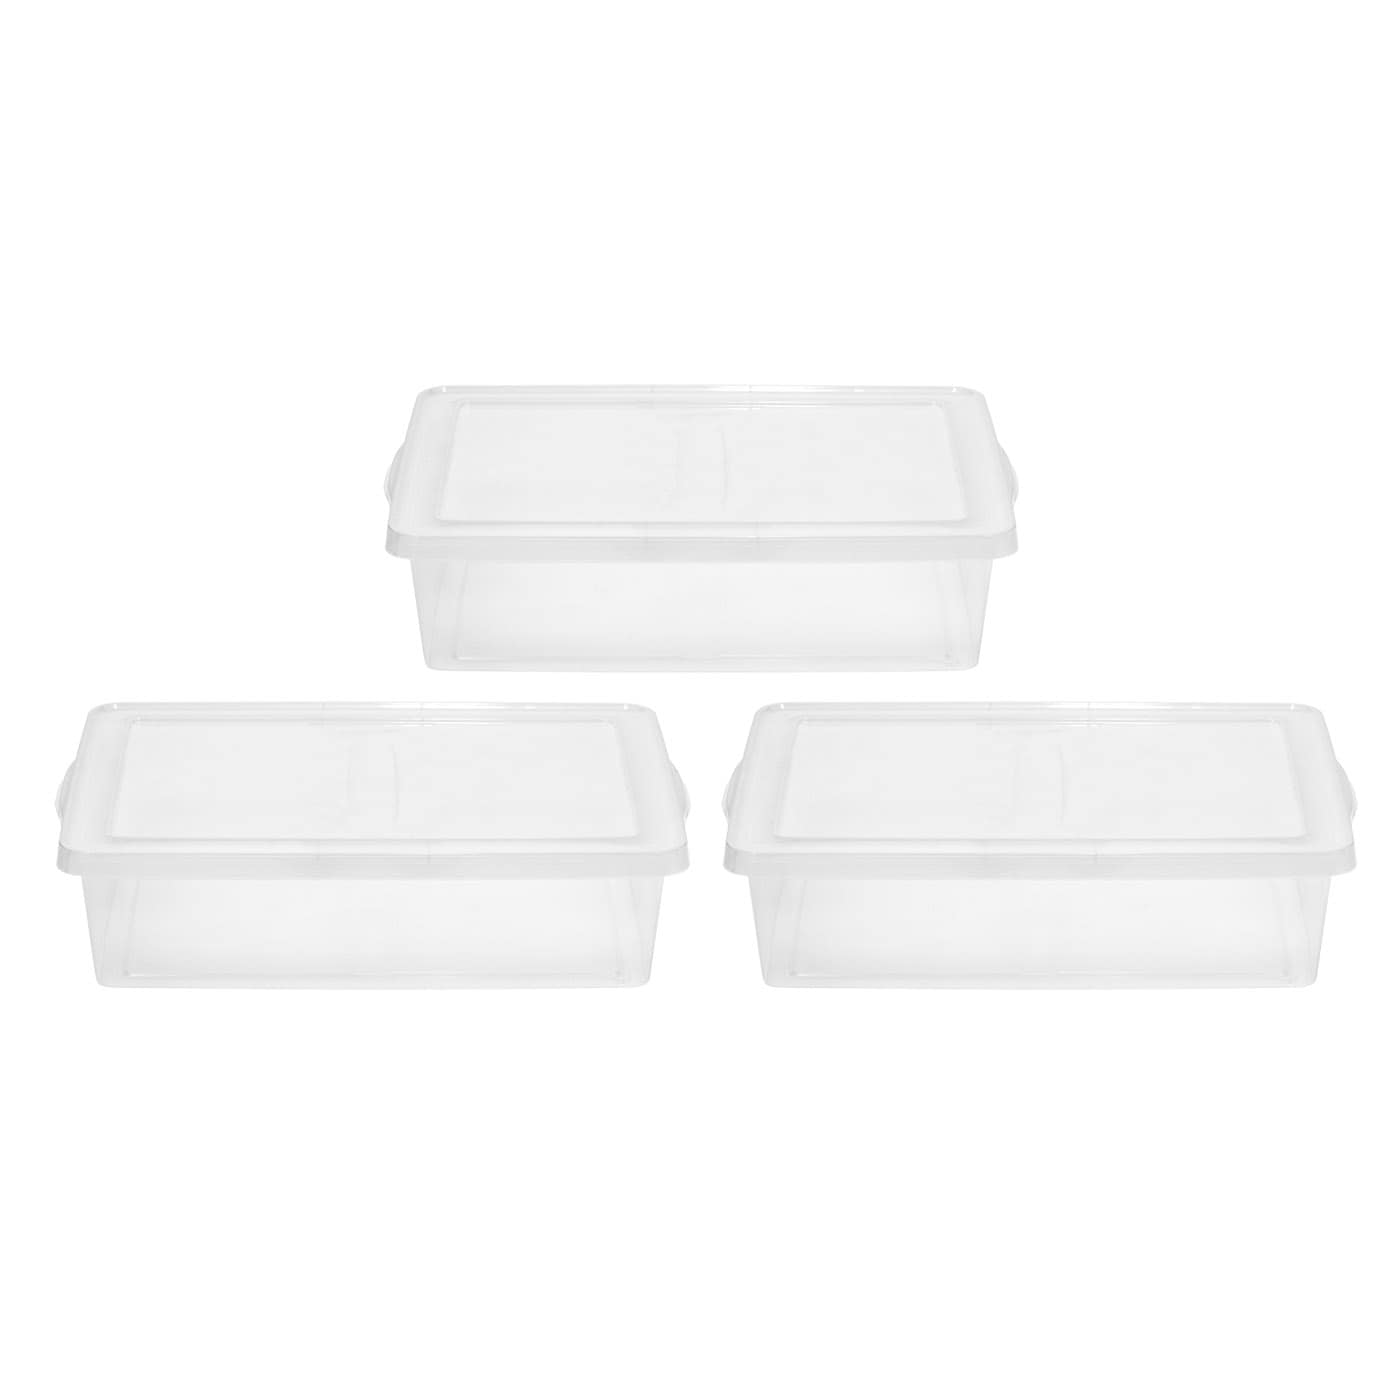 24 Inch Wide Plastic Storage Containers at Lowes.com